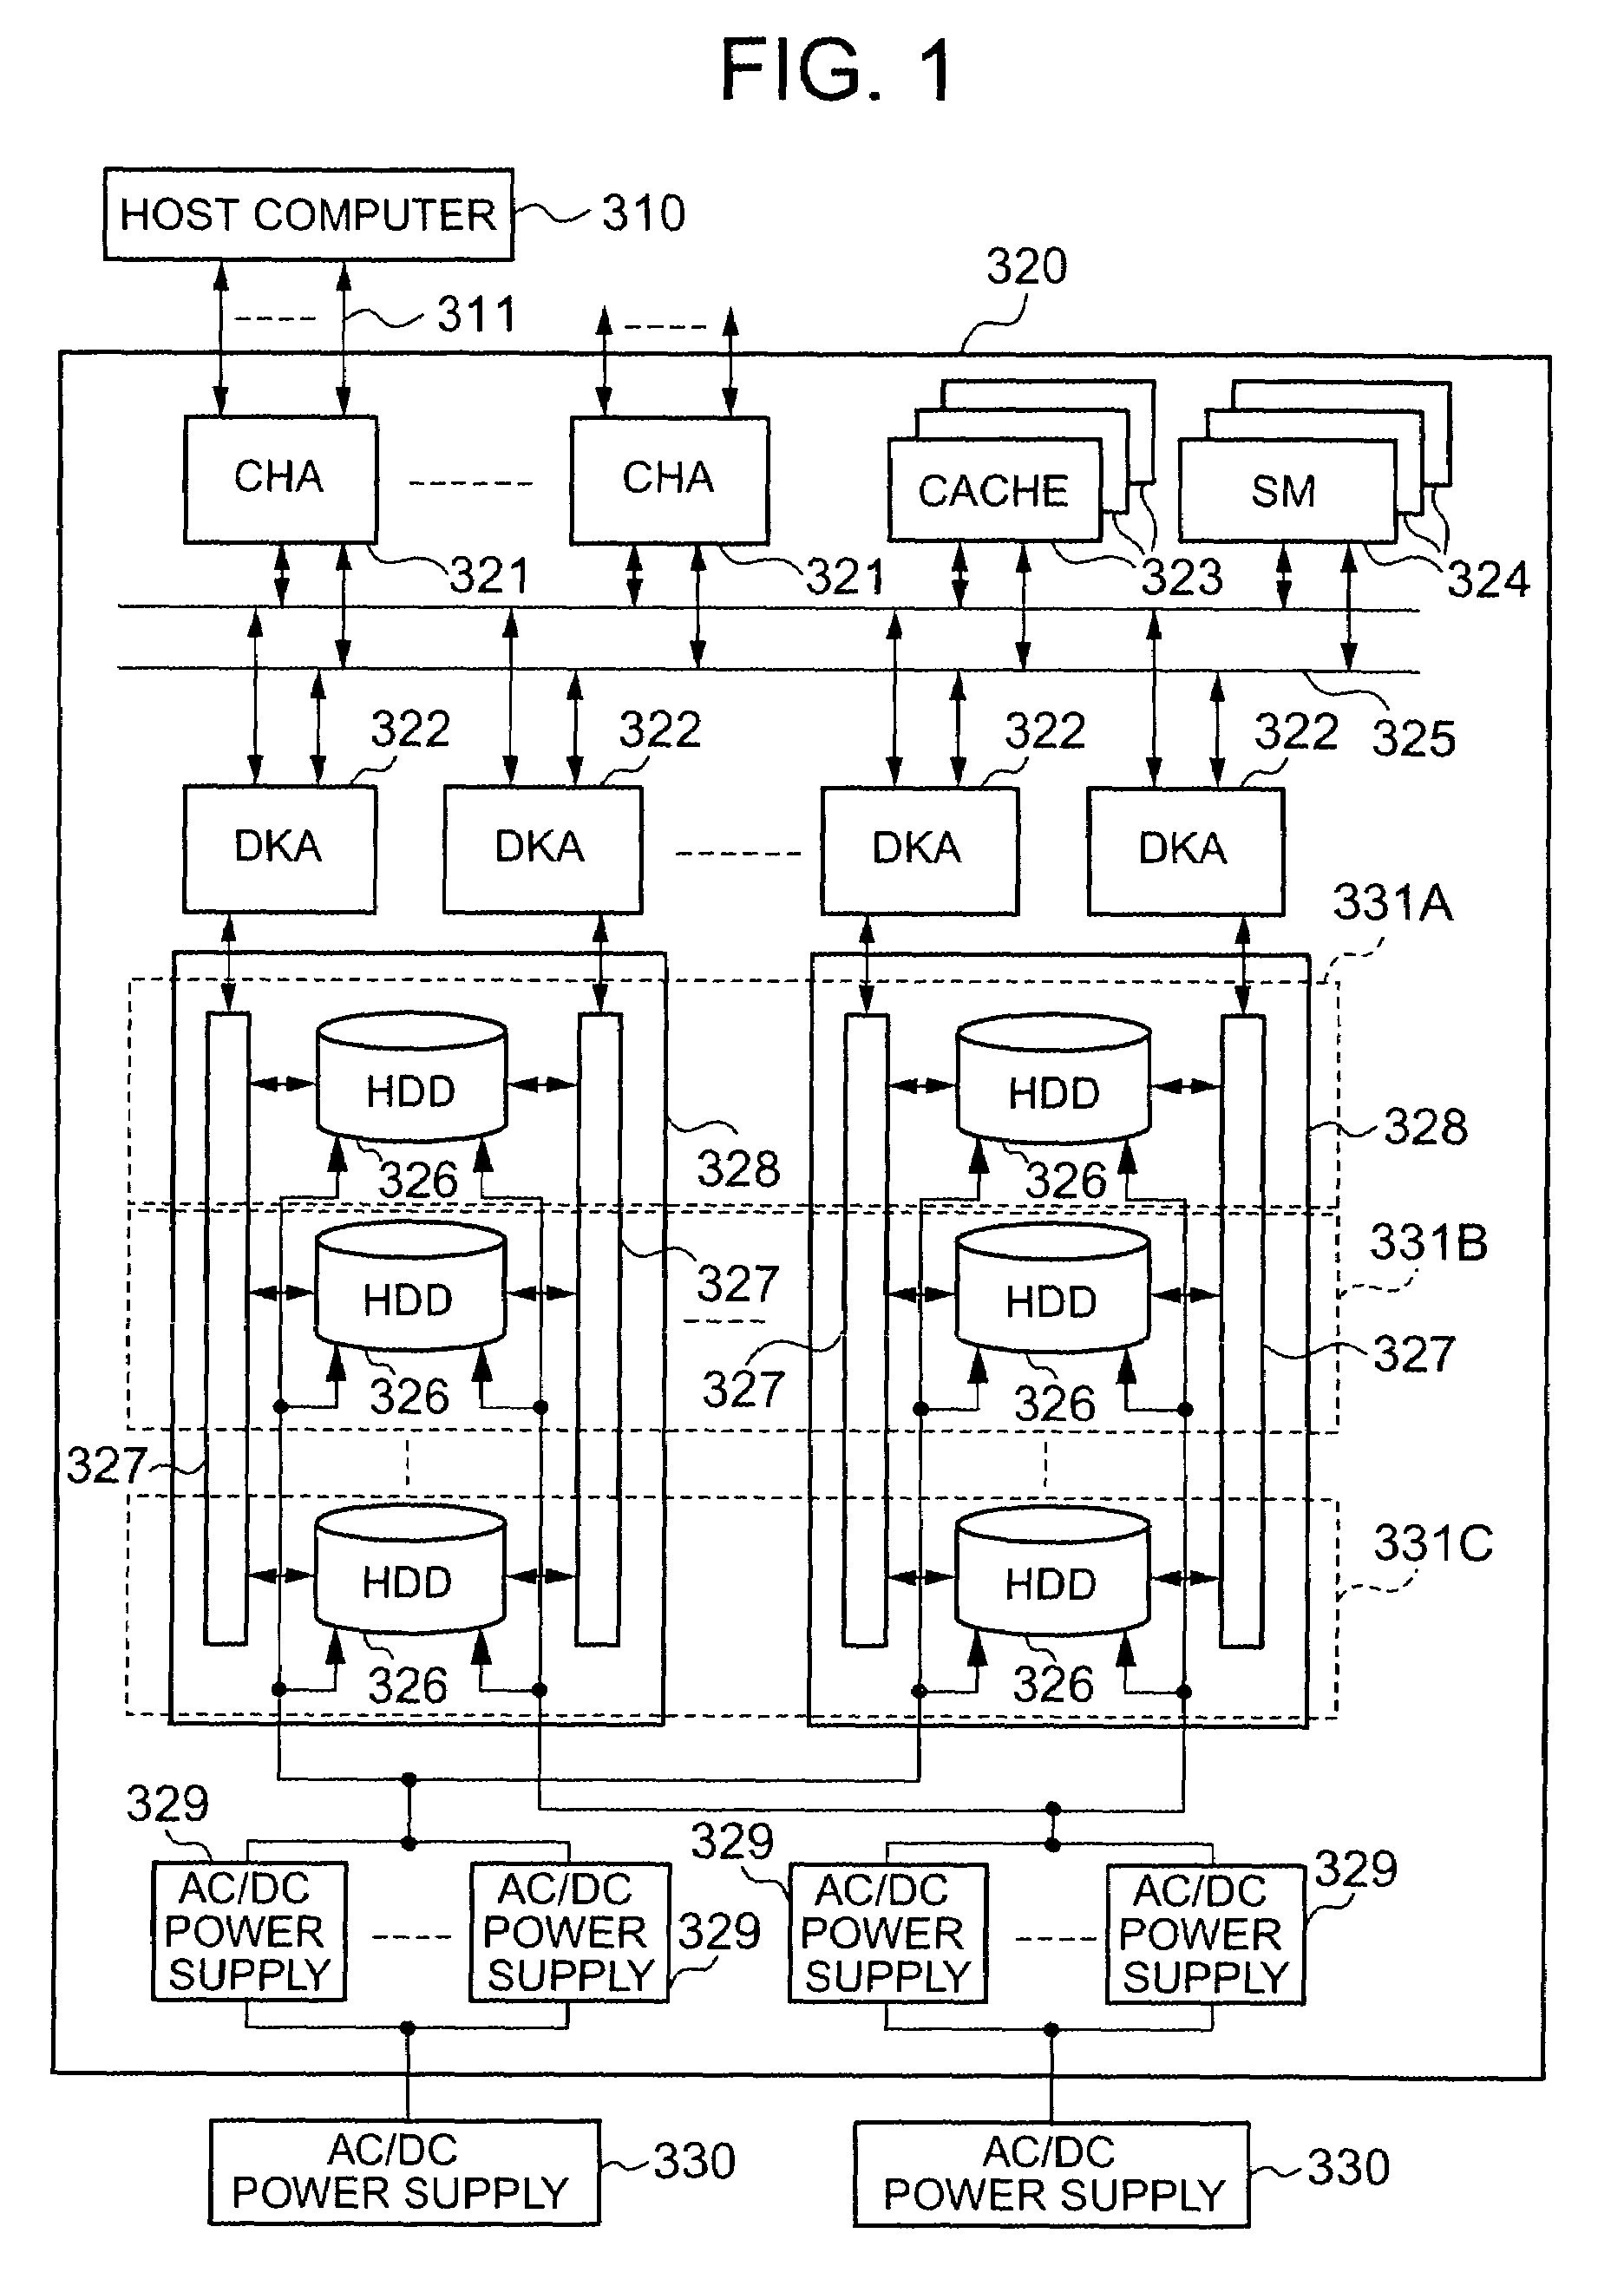 Power supply control system and storage device for holding data just prior to the occurence of an error